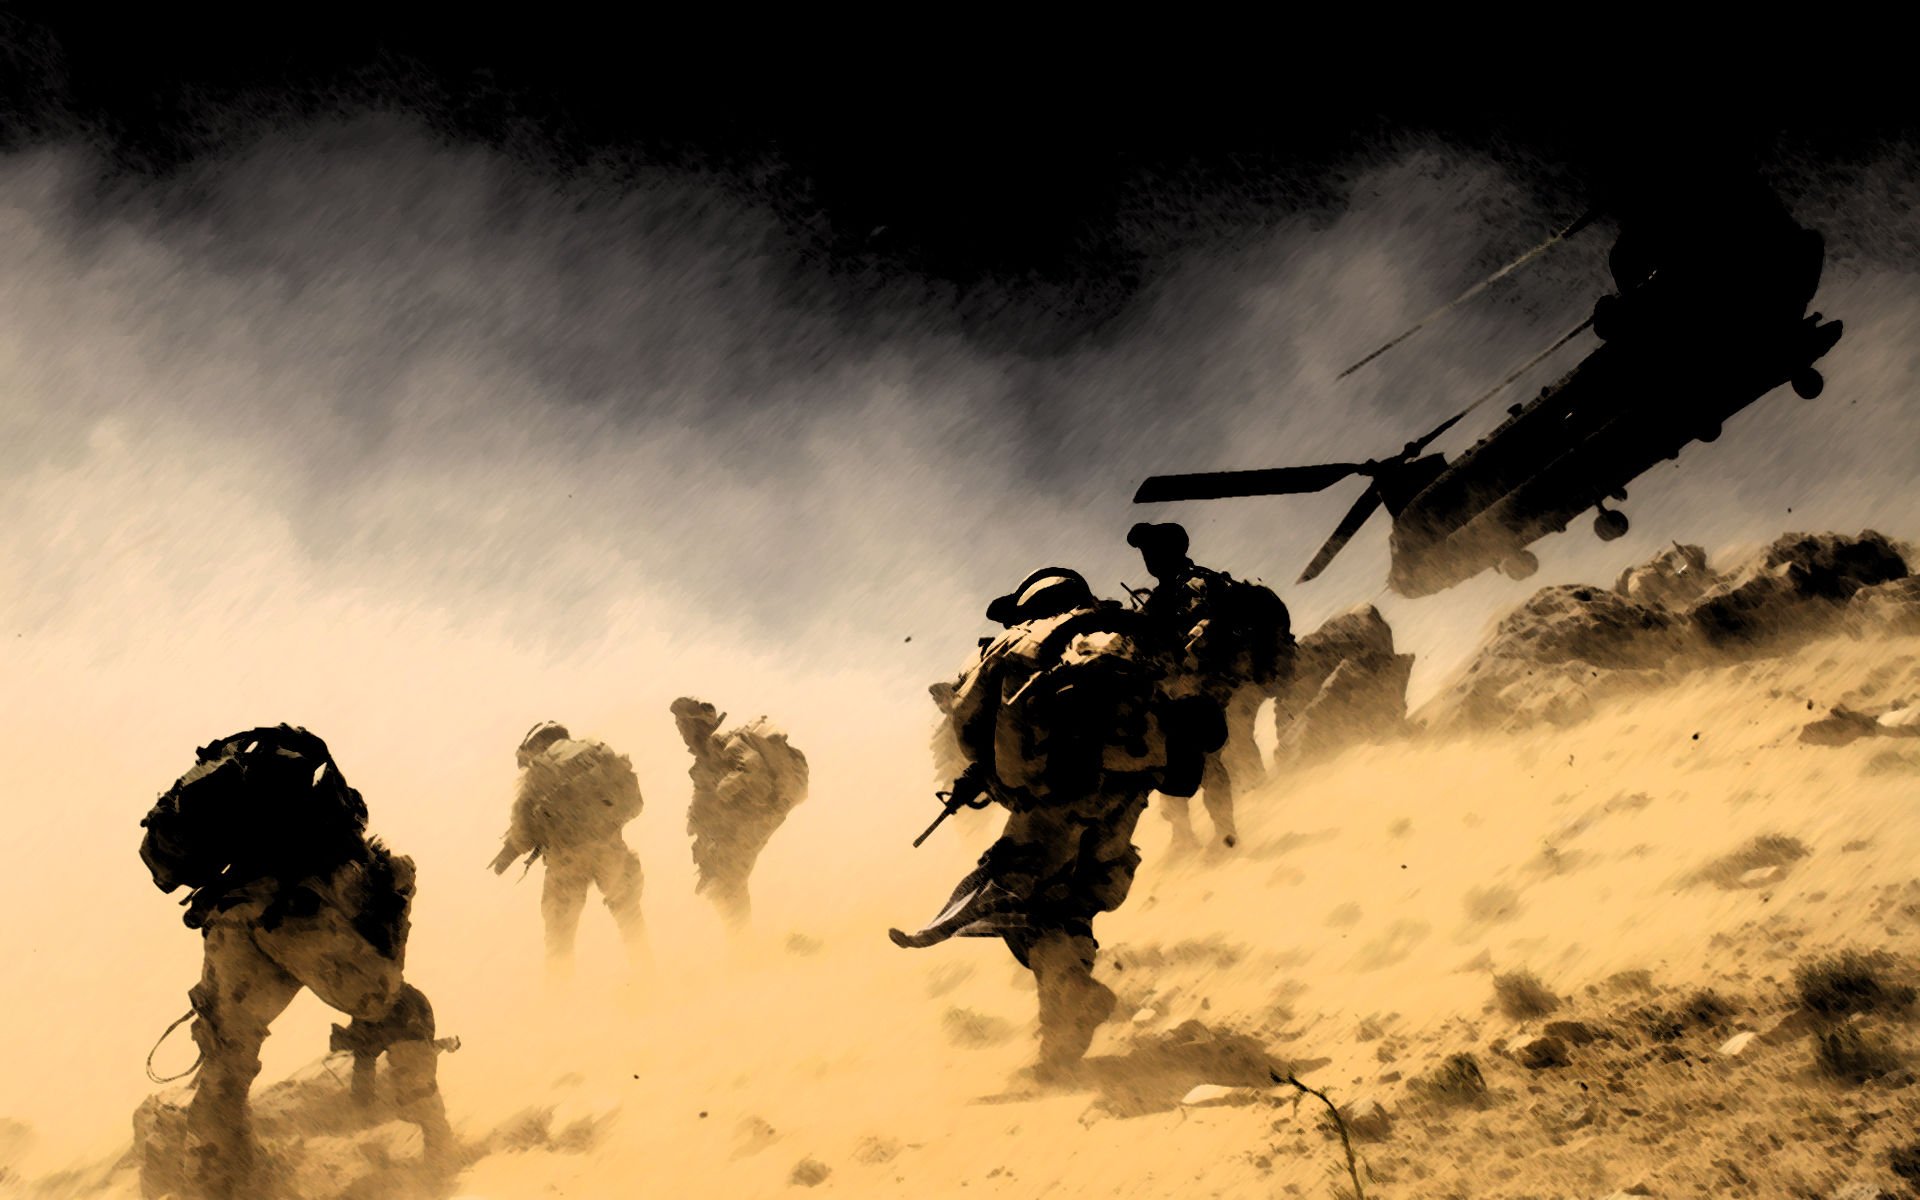 us army widescreen high resolution wallpaper download us army images